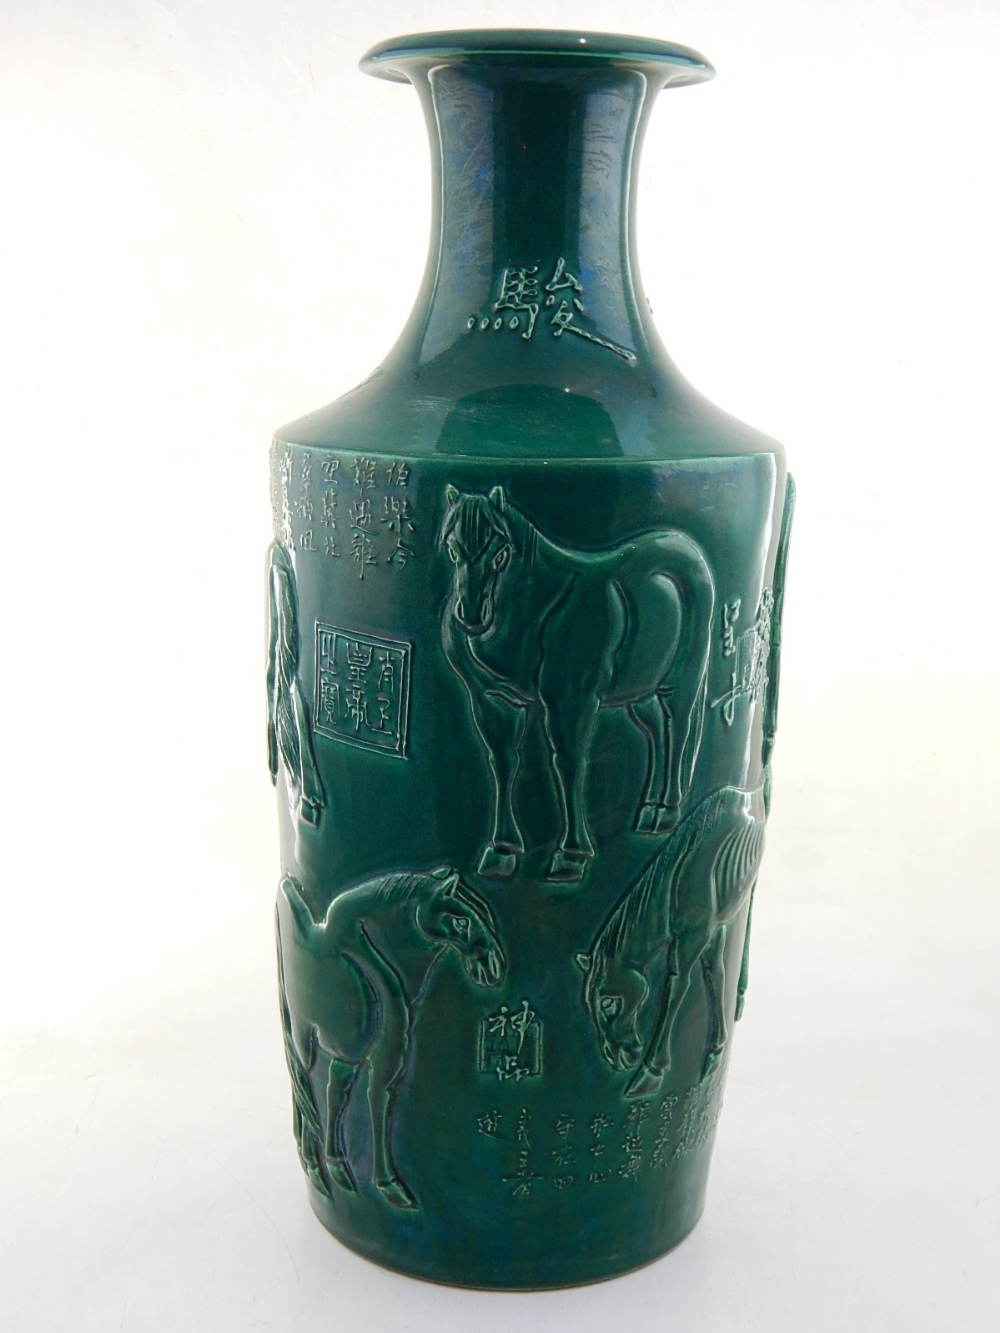 A Chinese green glazed porcelain vase, the body moulded with horses and script, H. 47cm. - Image 3 of 14